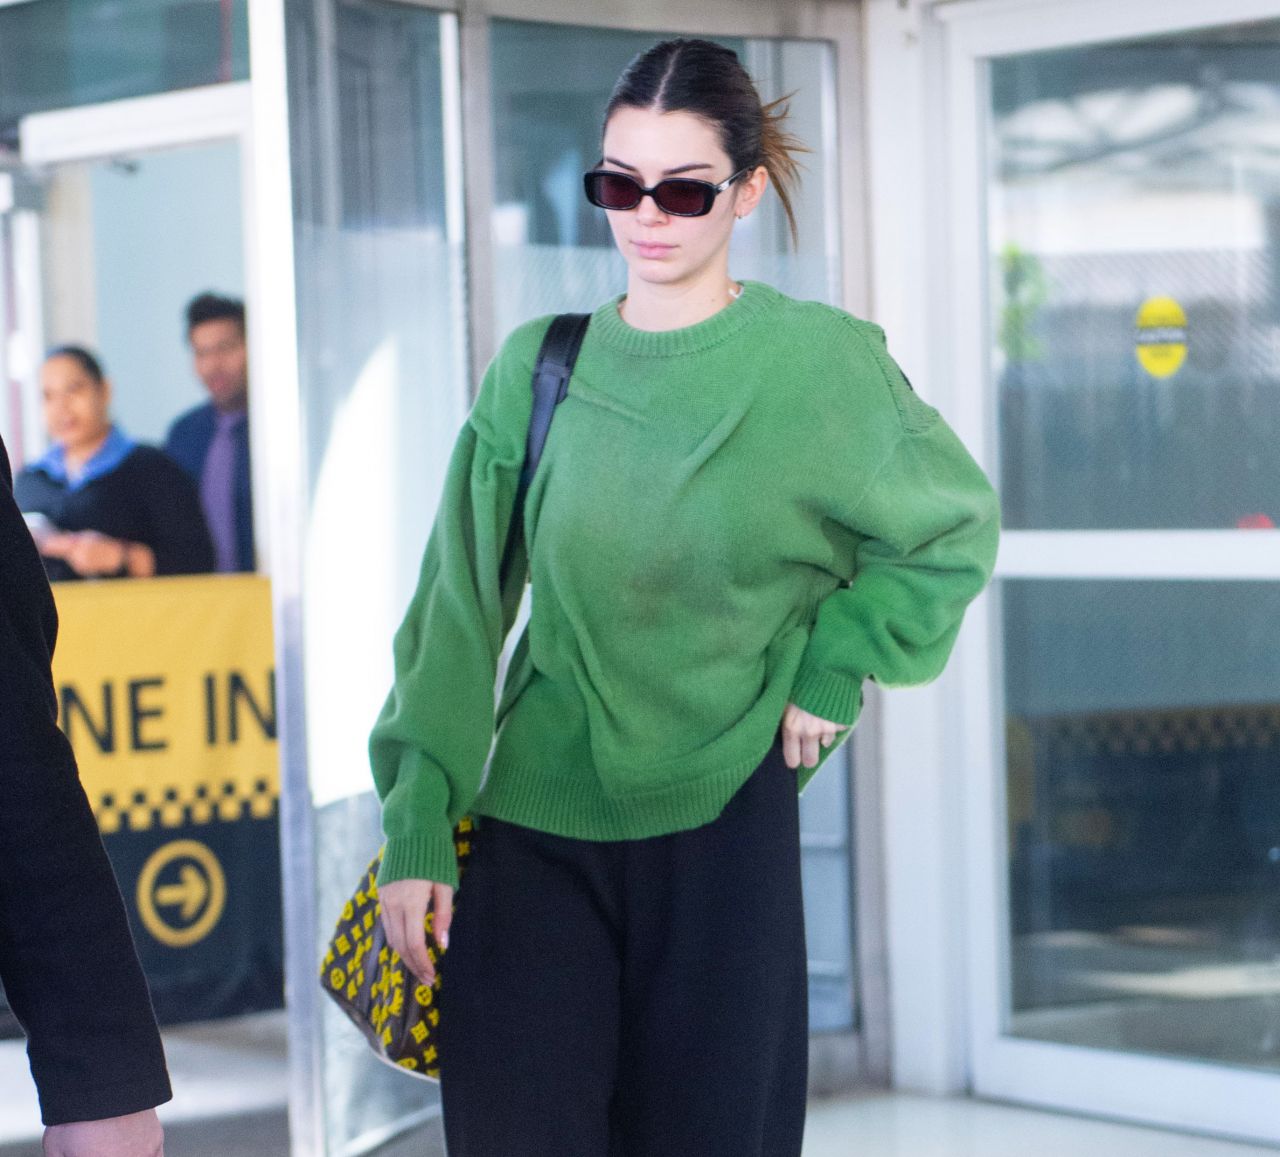 kendall jenner arrives at jfk airport in new york city-130519_2